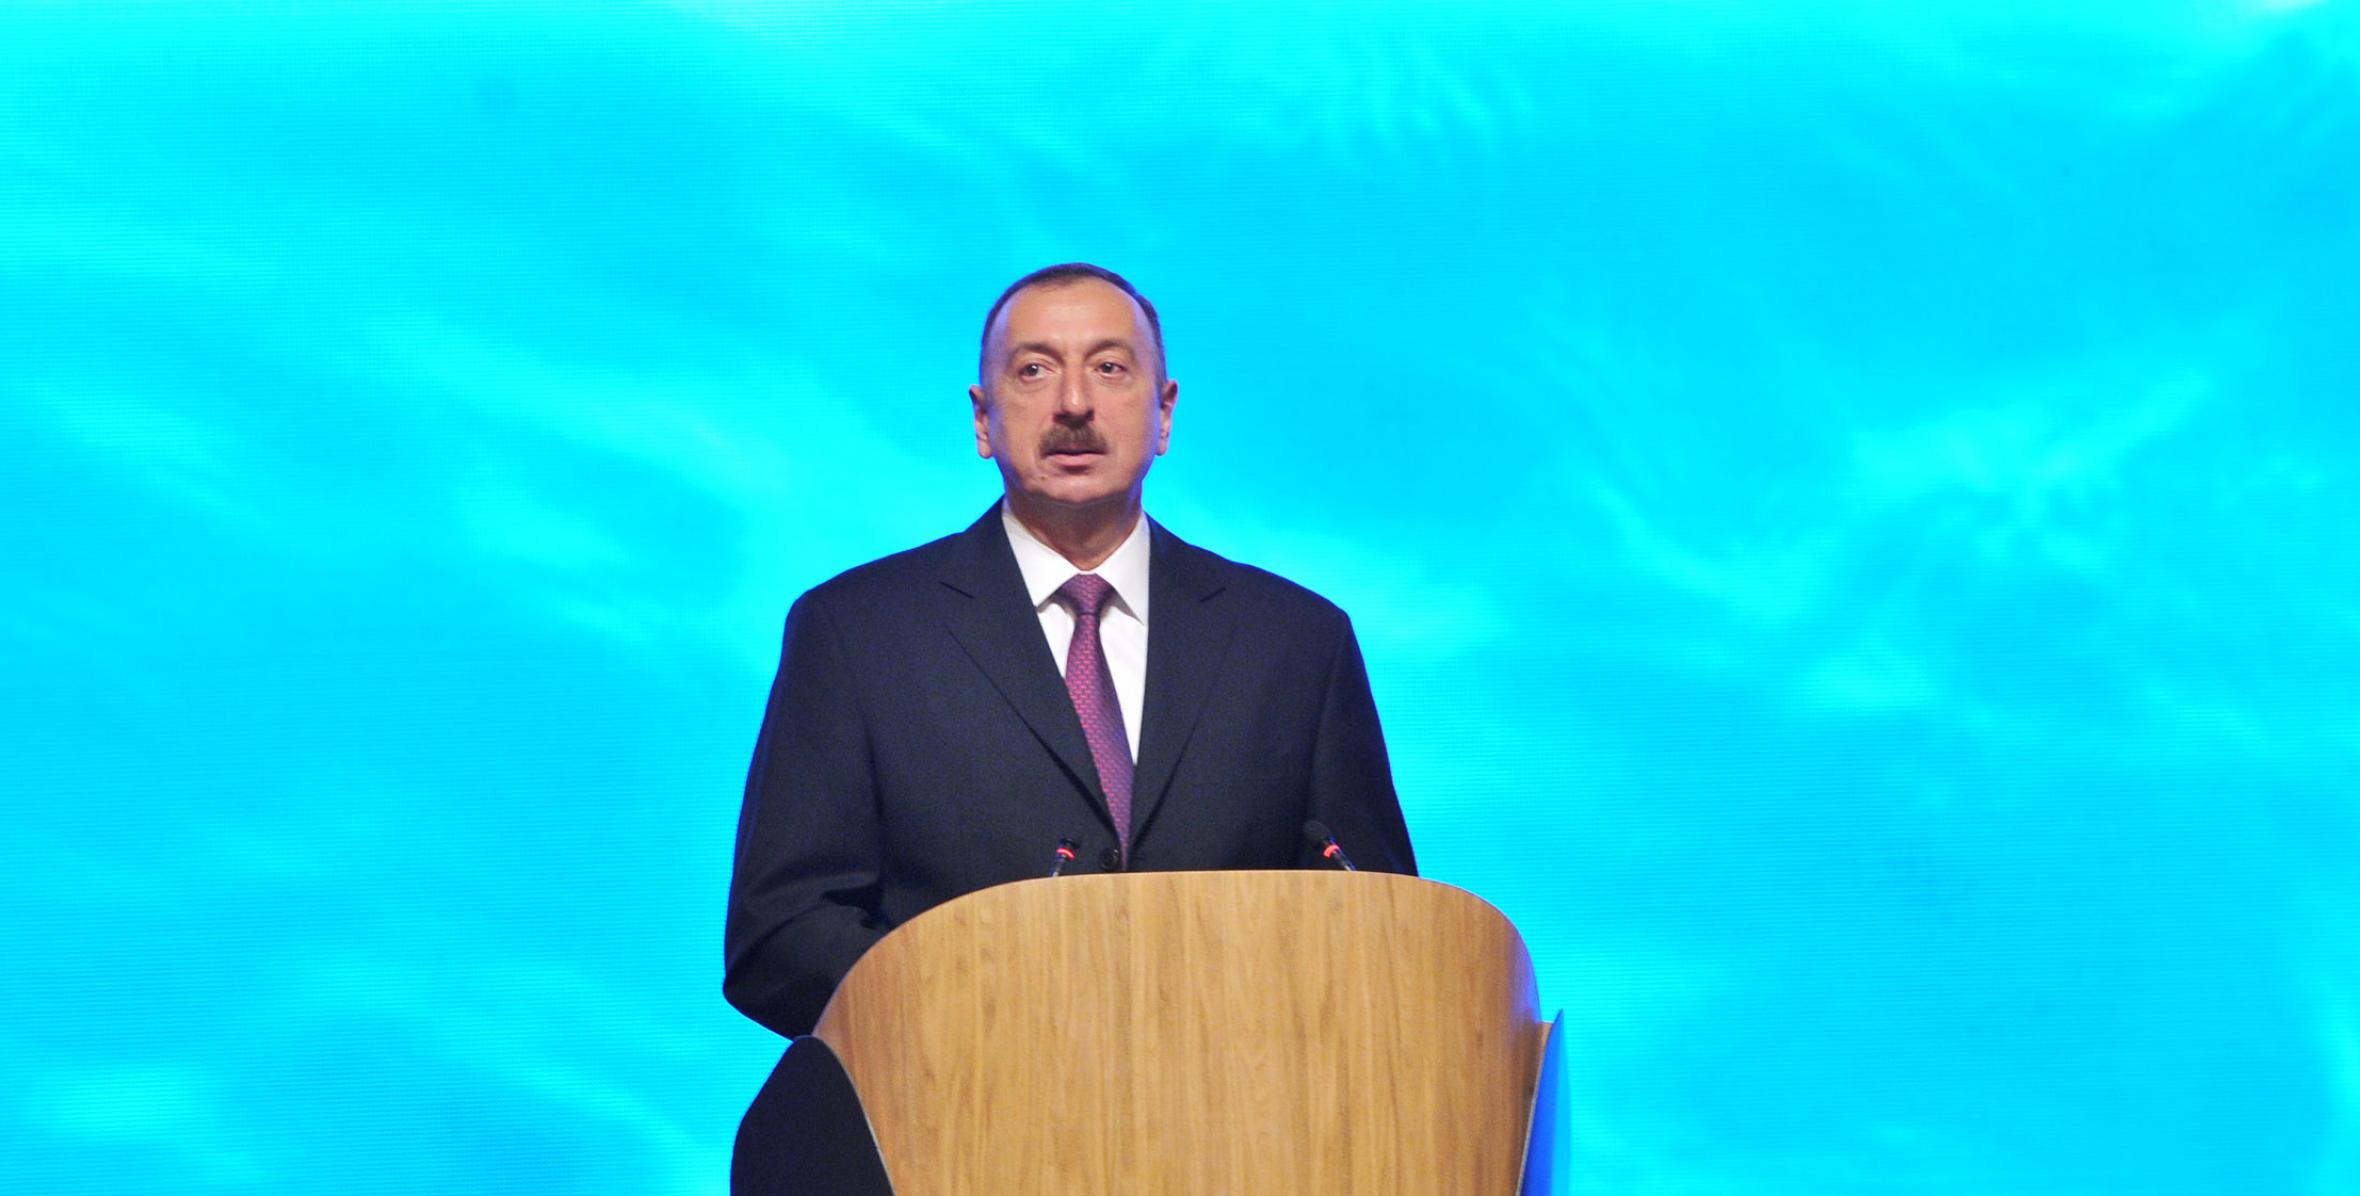 Speech by Ilham Aliyev at the signing ceremony of the final investment decision on Shah Deniz-2